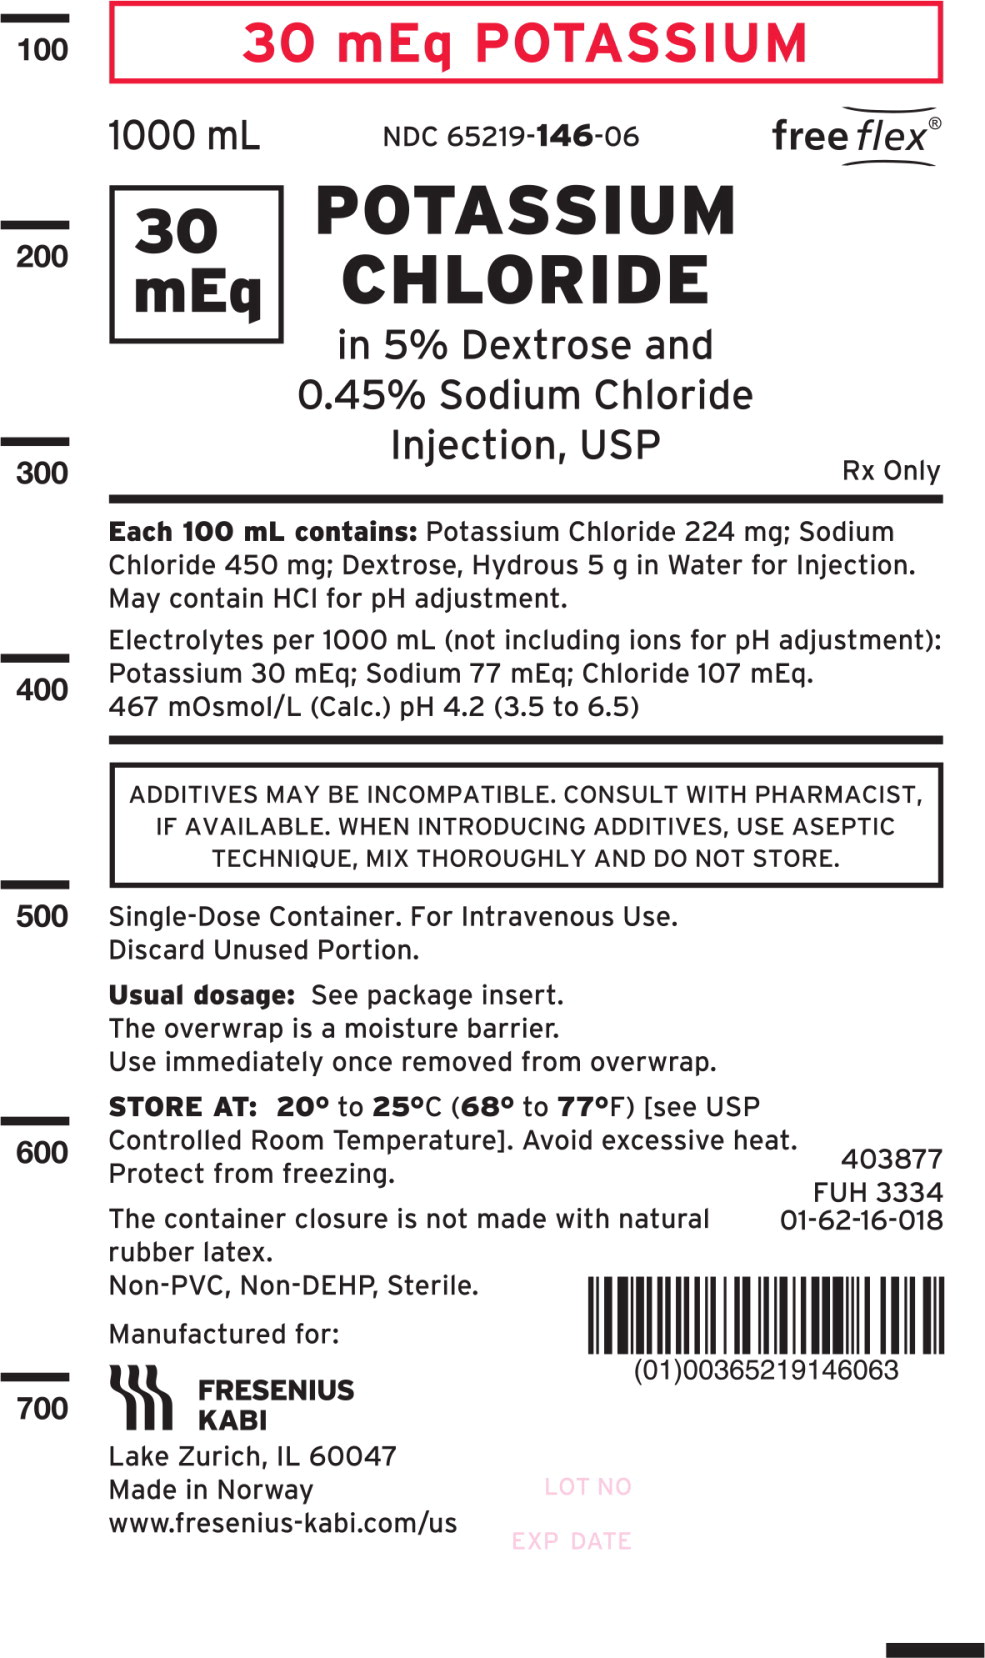 PACKAGE LABEL - PRINCIPAL DISPLAY – 30 mEq POTASSIUM CHLORIDE in 5% Dextrose and 0.45% Sodium Chloride Injection, USP 1000 mL Bag Label
